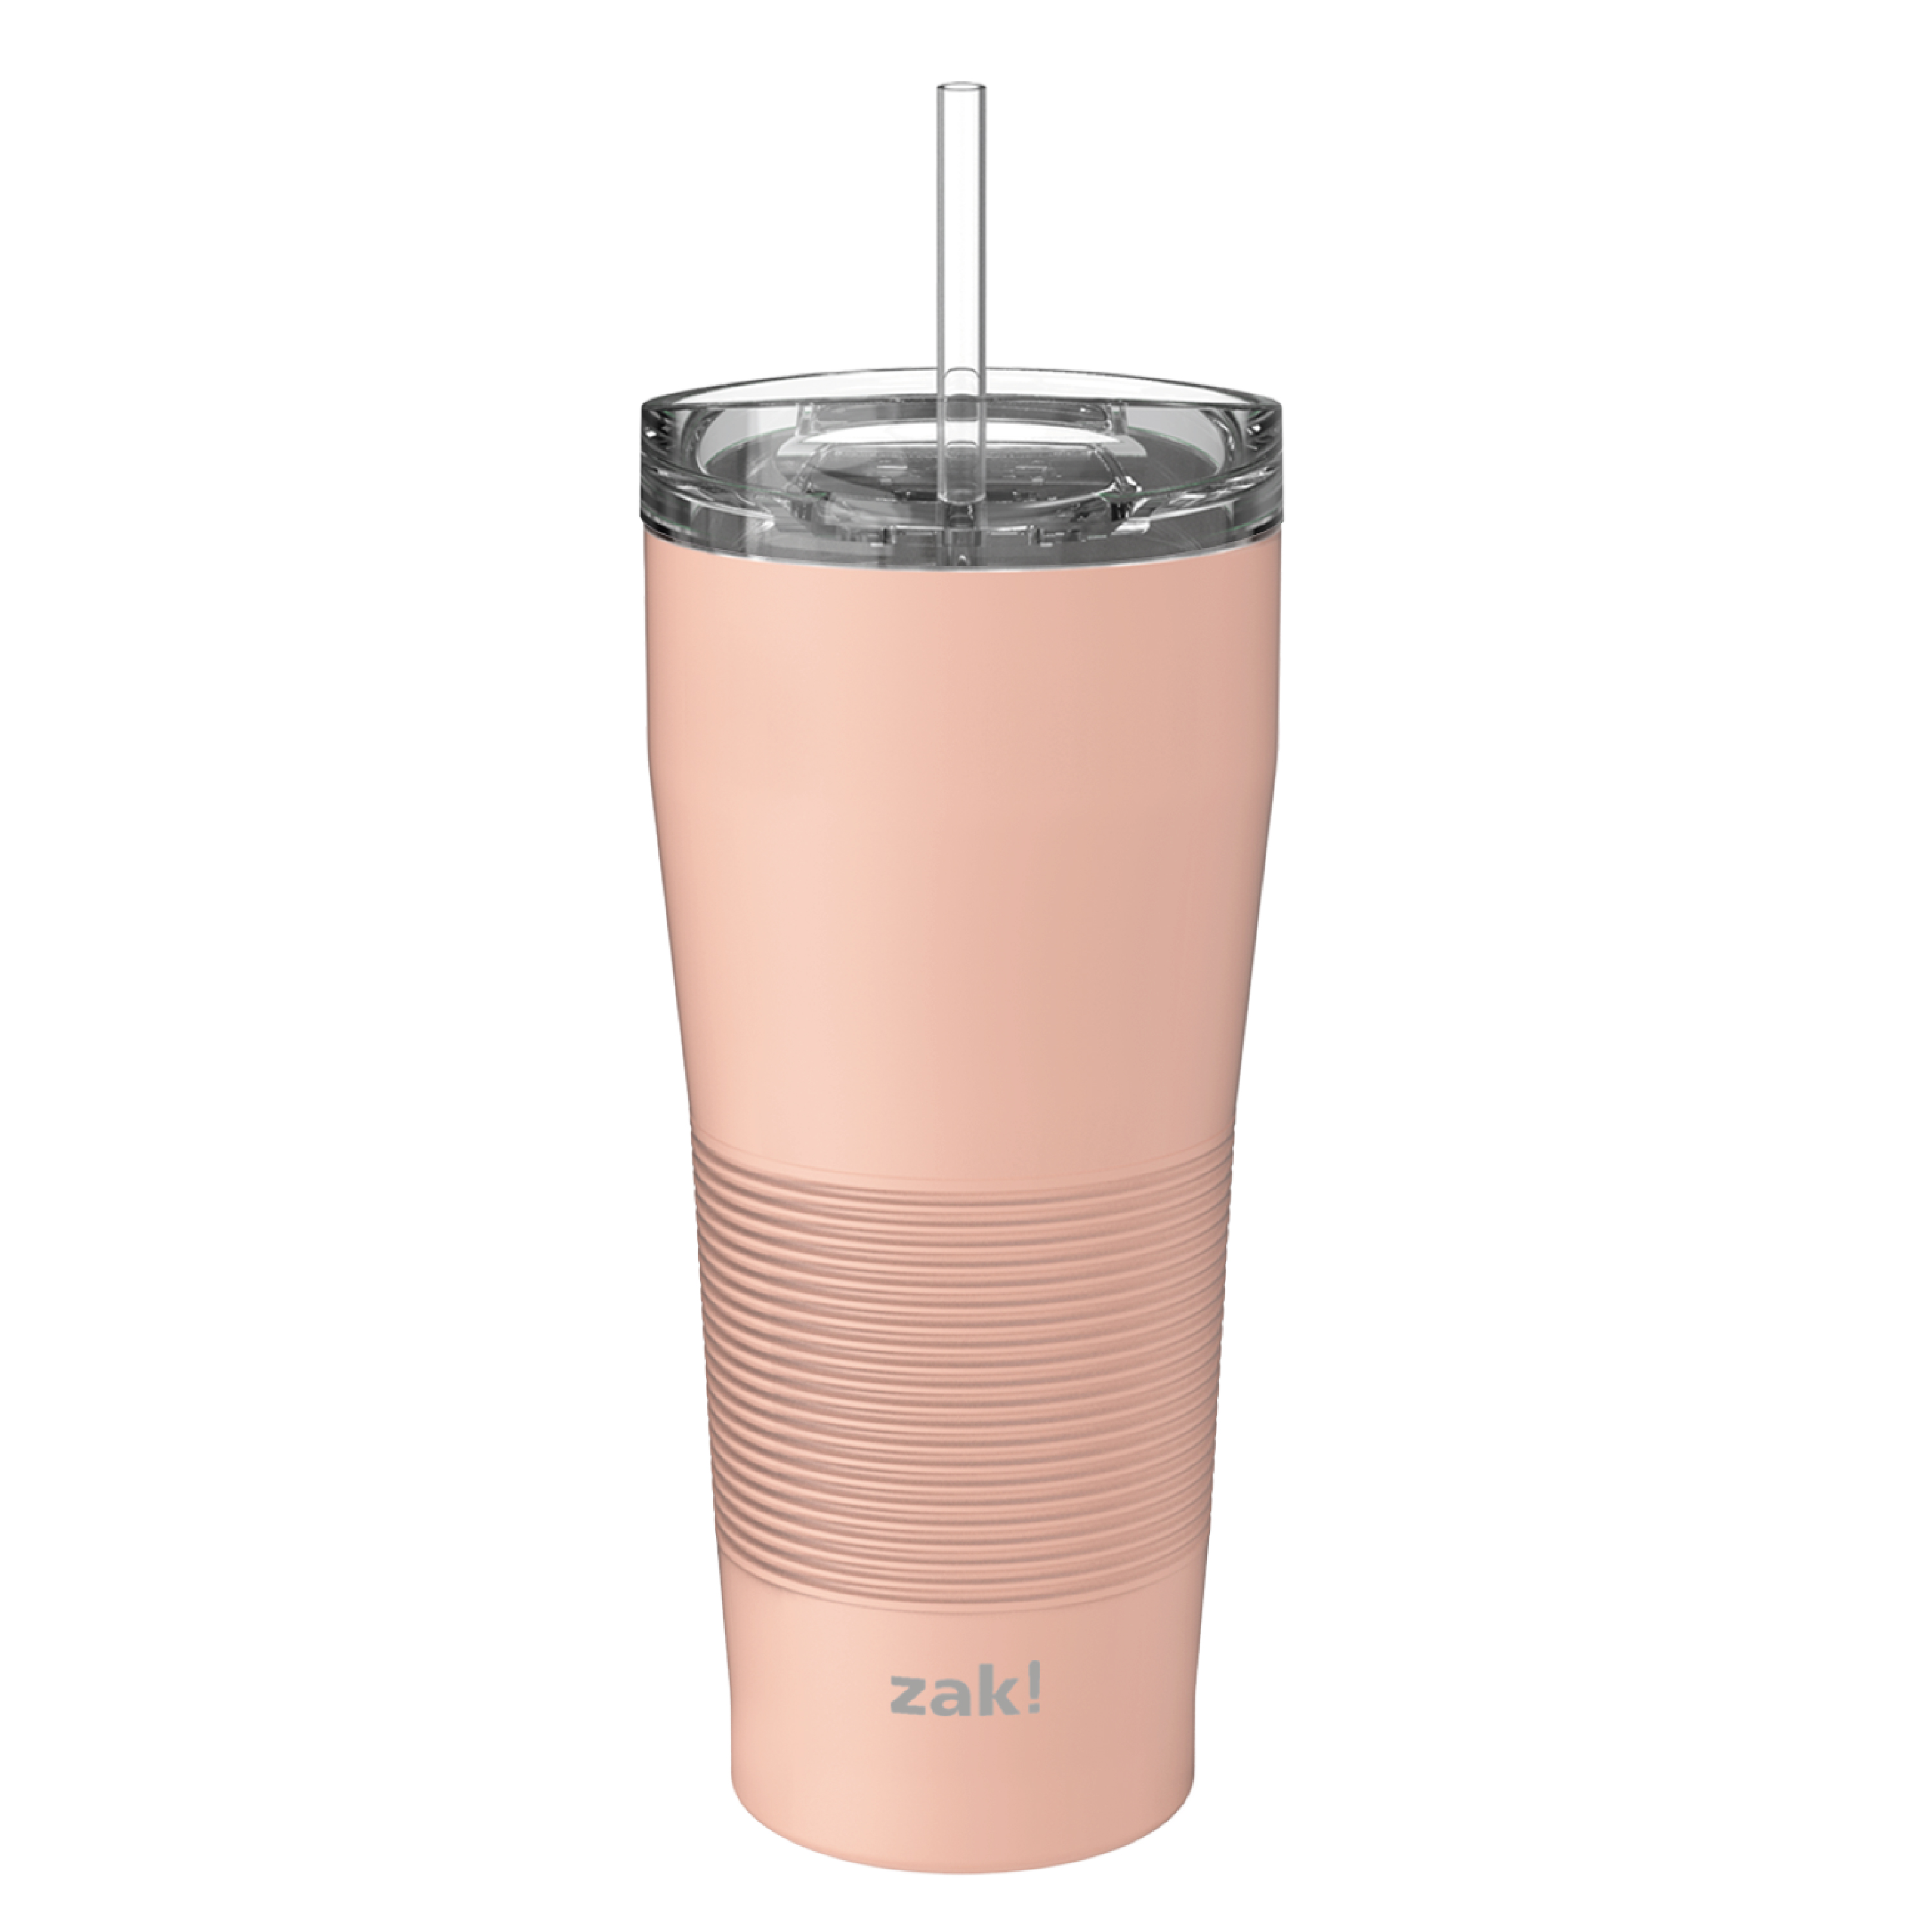 Zak Hydration 28 ounce Stainless Steel Vacuum Insulated Tumbler with Straw, Misty Rose slideshow image 1